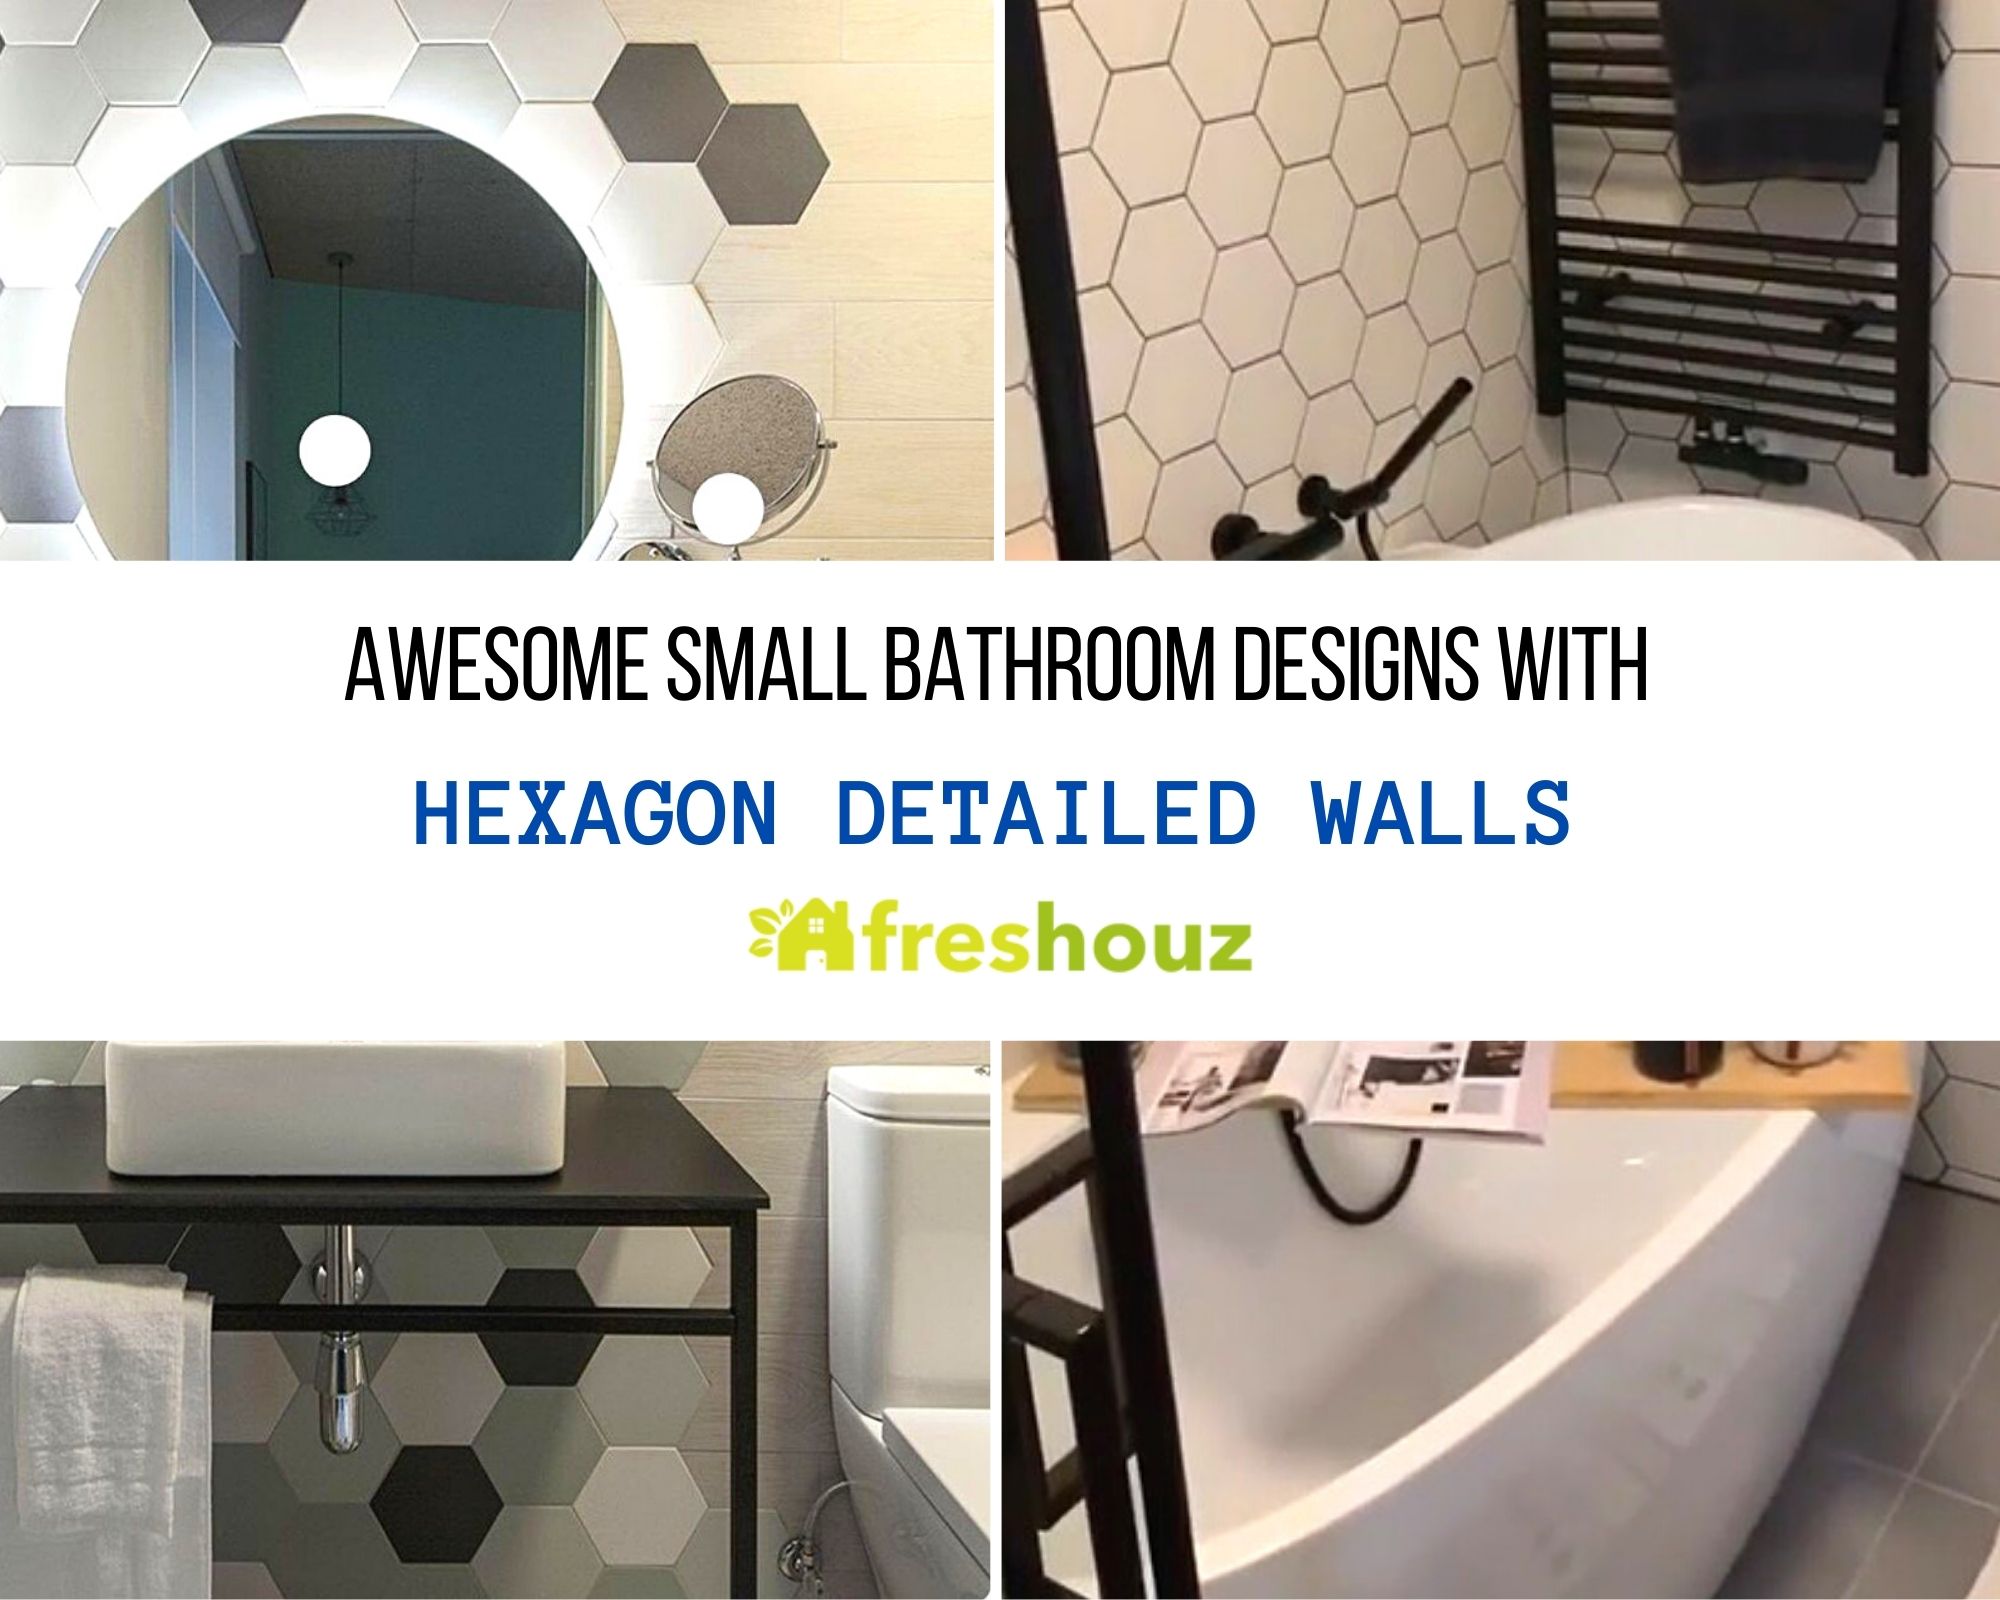 Awesome Small Bathroom Designs With Hexagon Detailed Walls